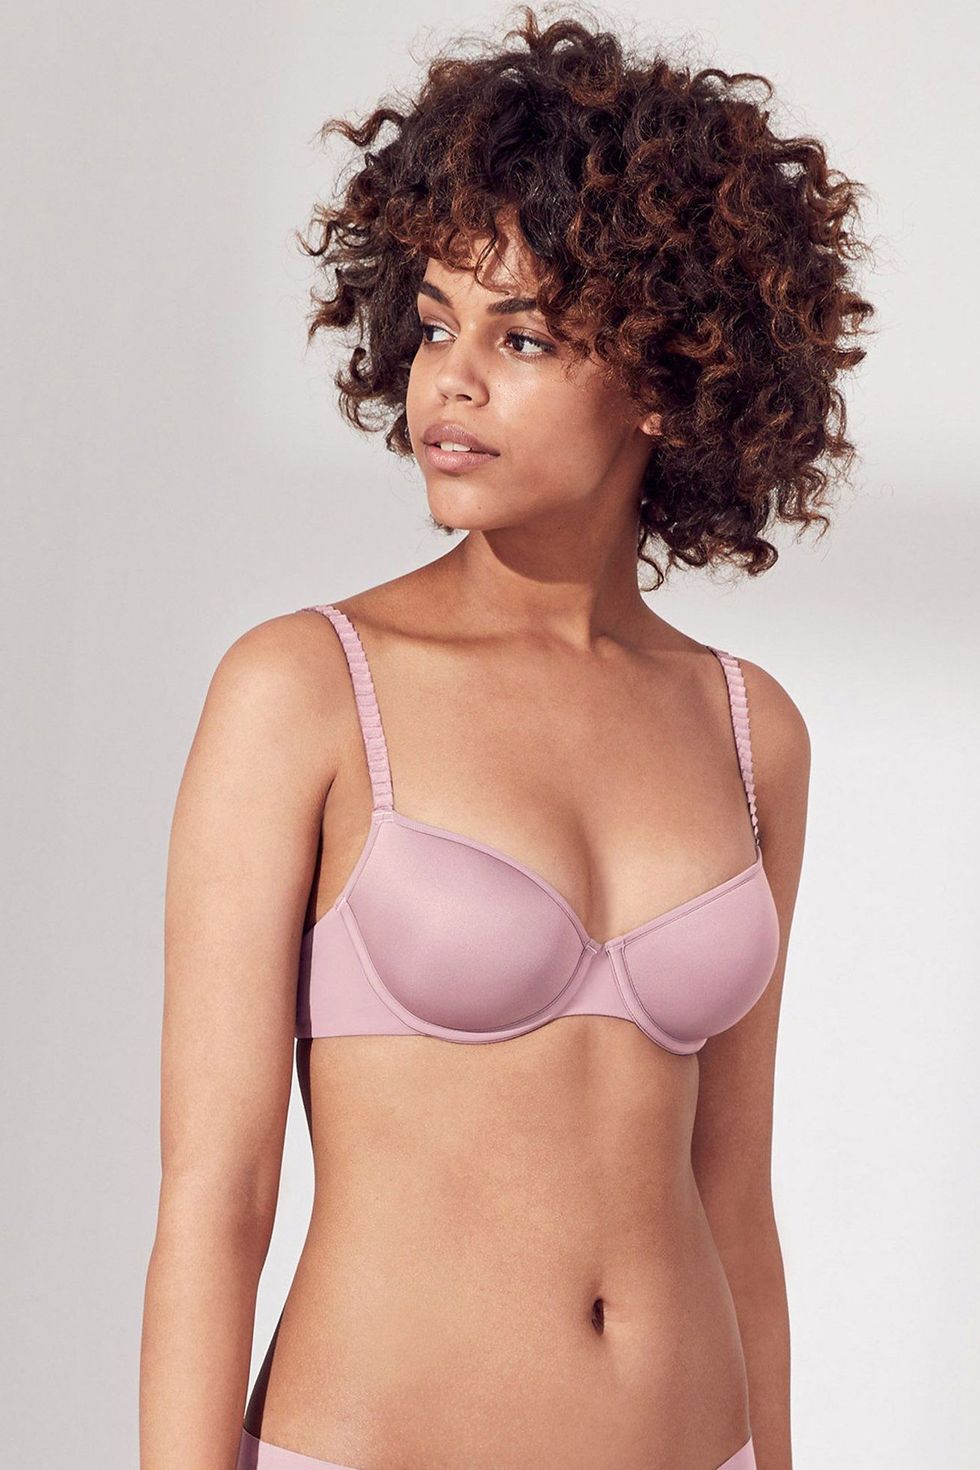 ThirdLove Review & How Many Bras Should You Own?